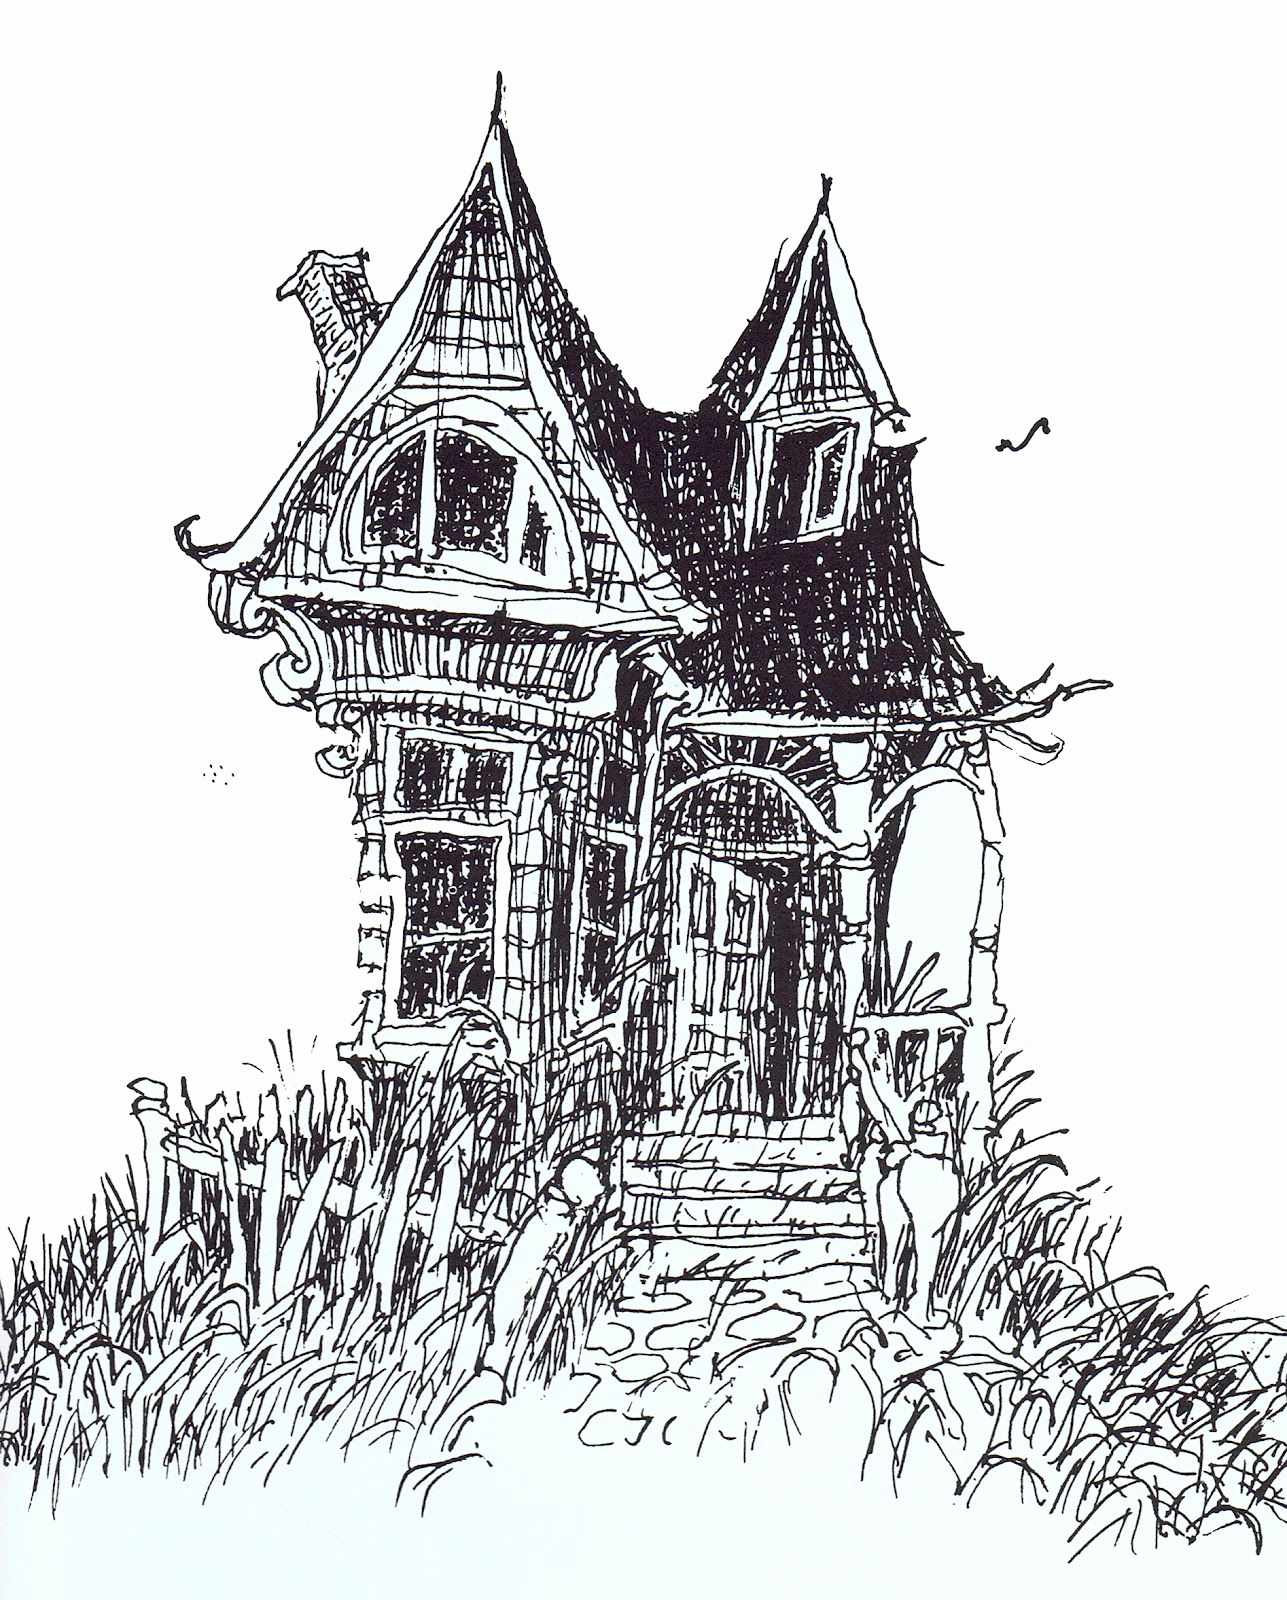 Invitation by Shel Silverstein Lovely Shel Silverstein Enter This Deserted House but Please